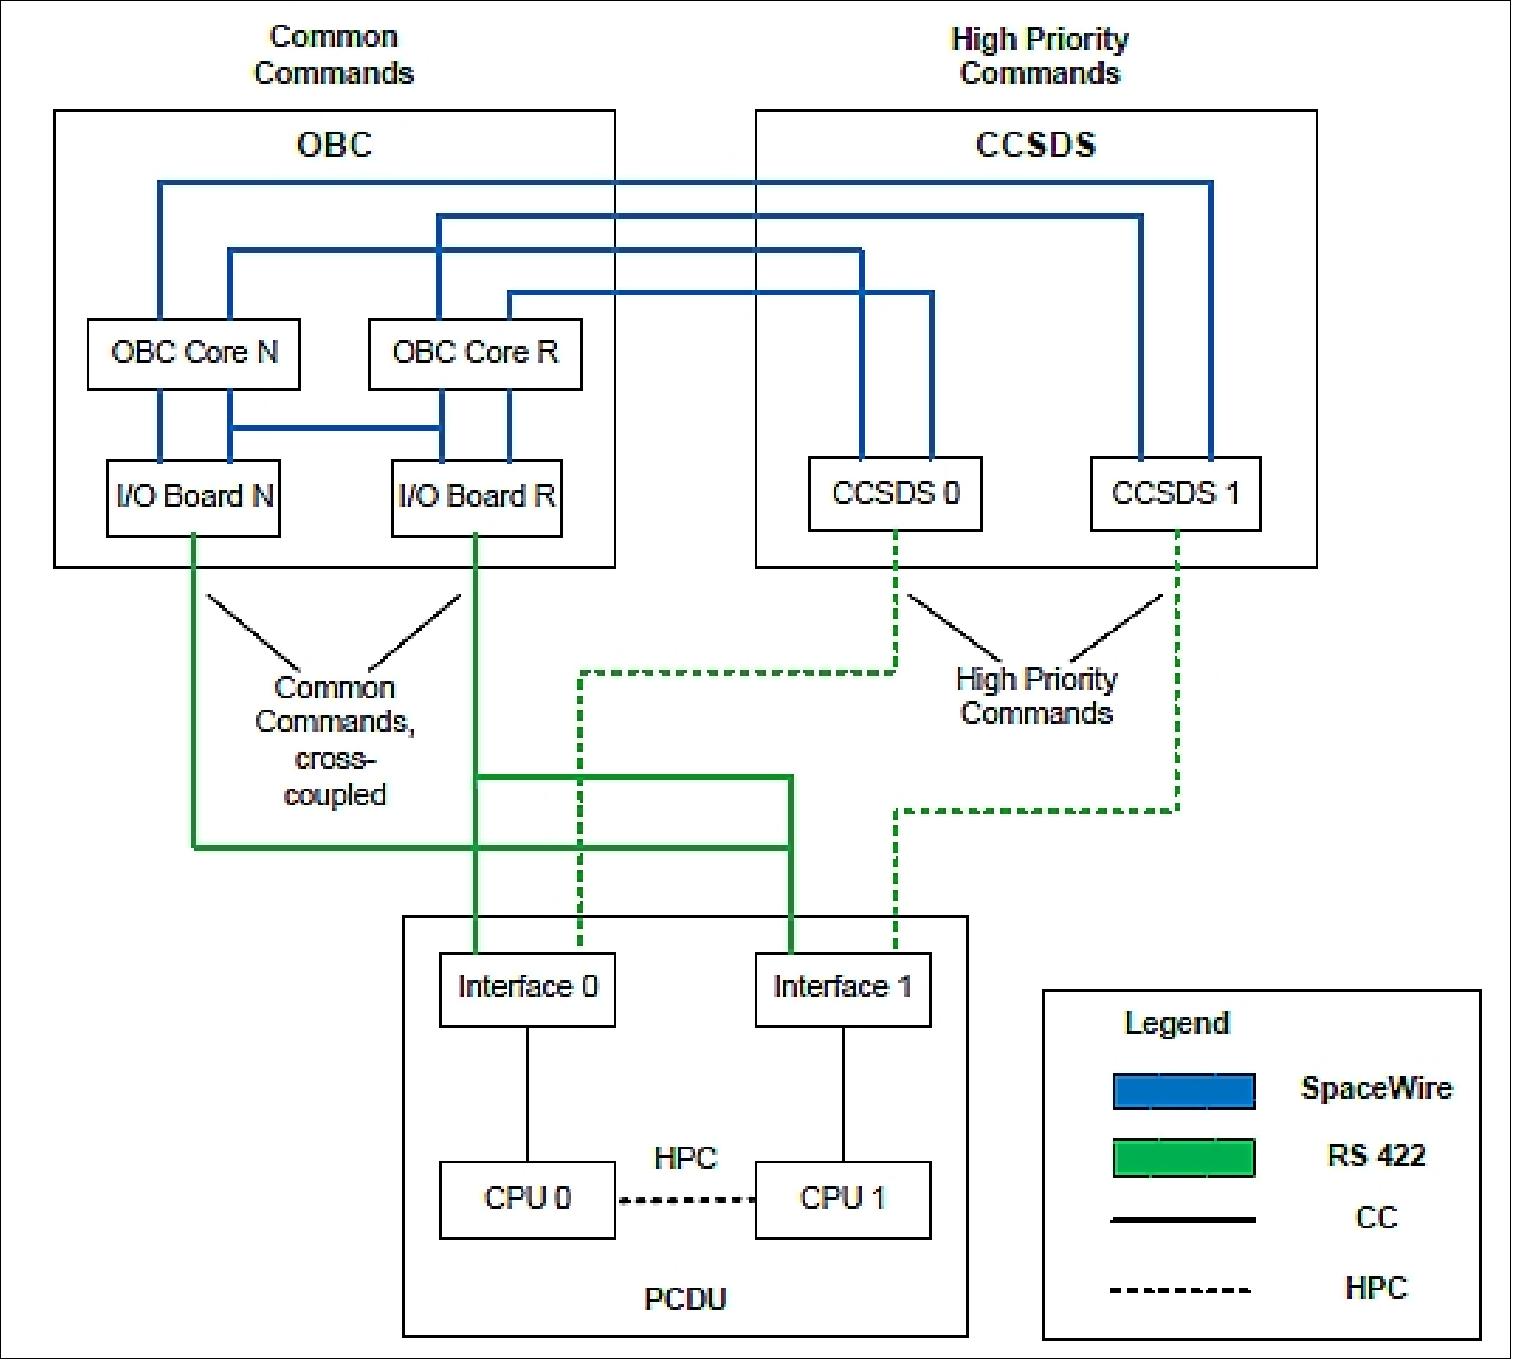 Figure 6: Overview of Interface Connections between OBC System and PCDU (image credit: IRS Stuttgart) 18)